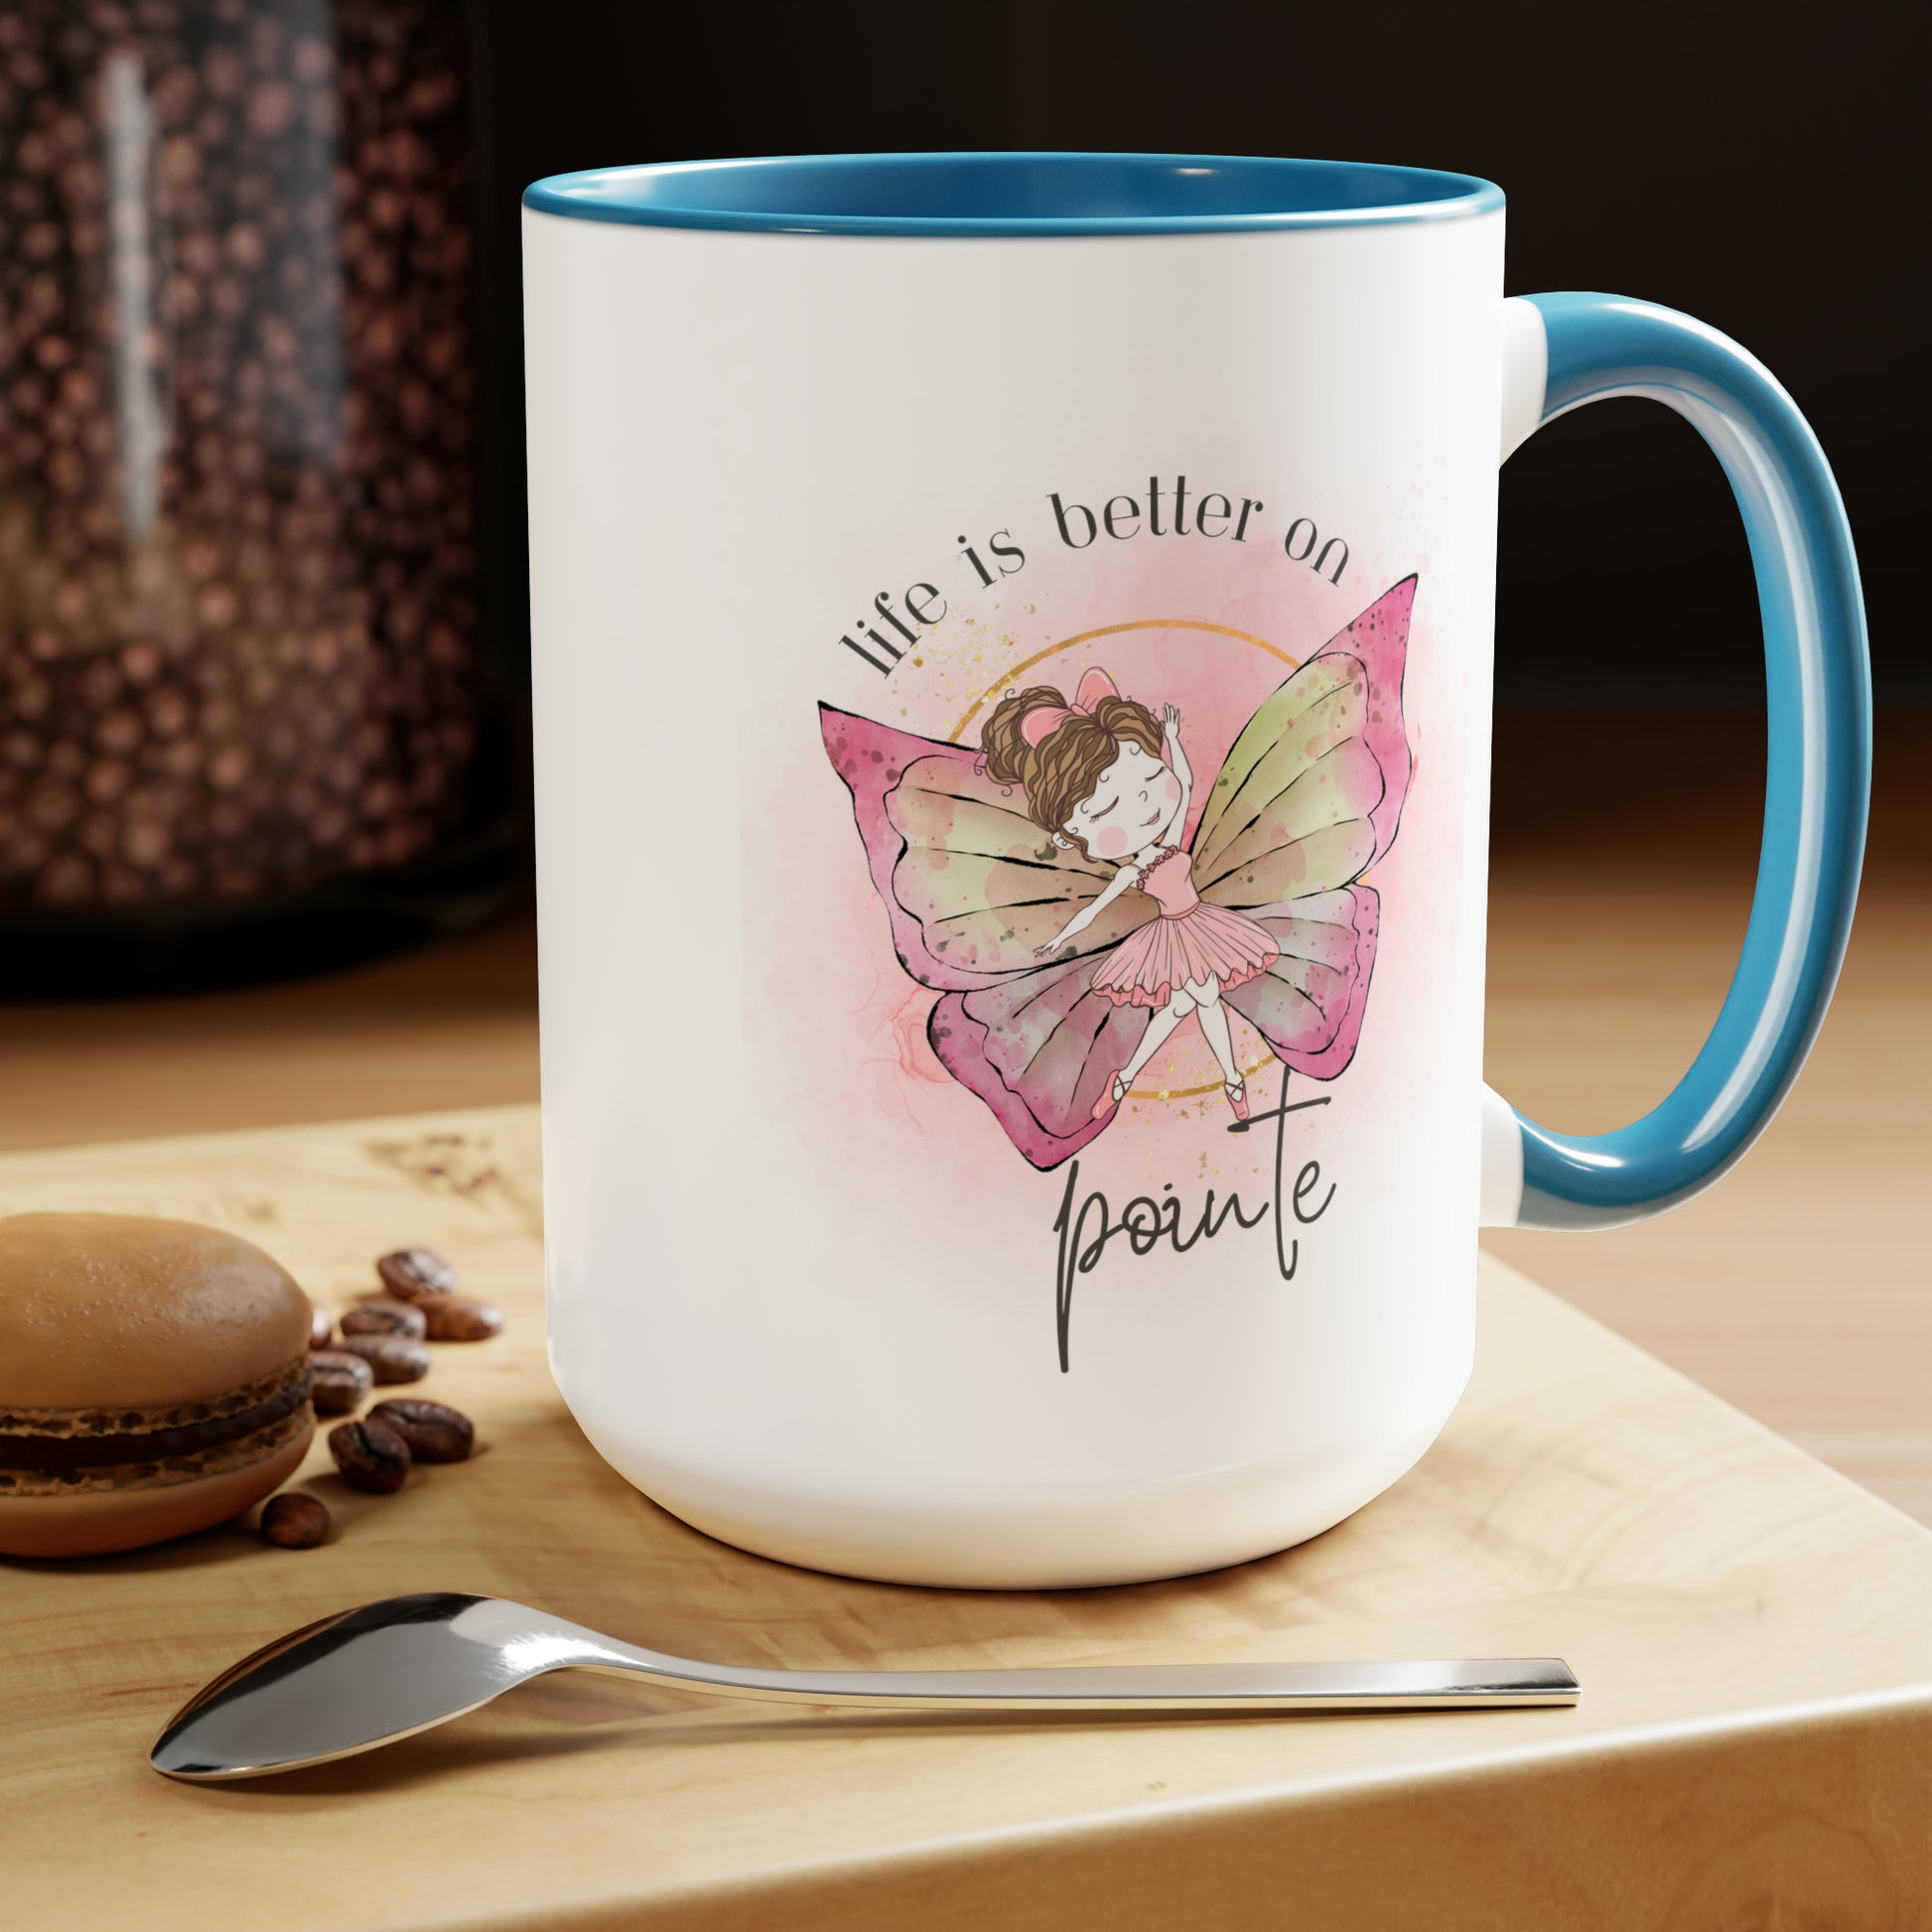 Two-Tone Coffee Mugs, 15oz - Young Ballerina with butterfly wings - blue rim